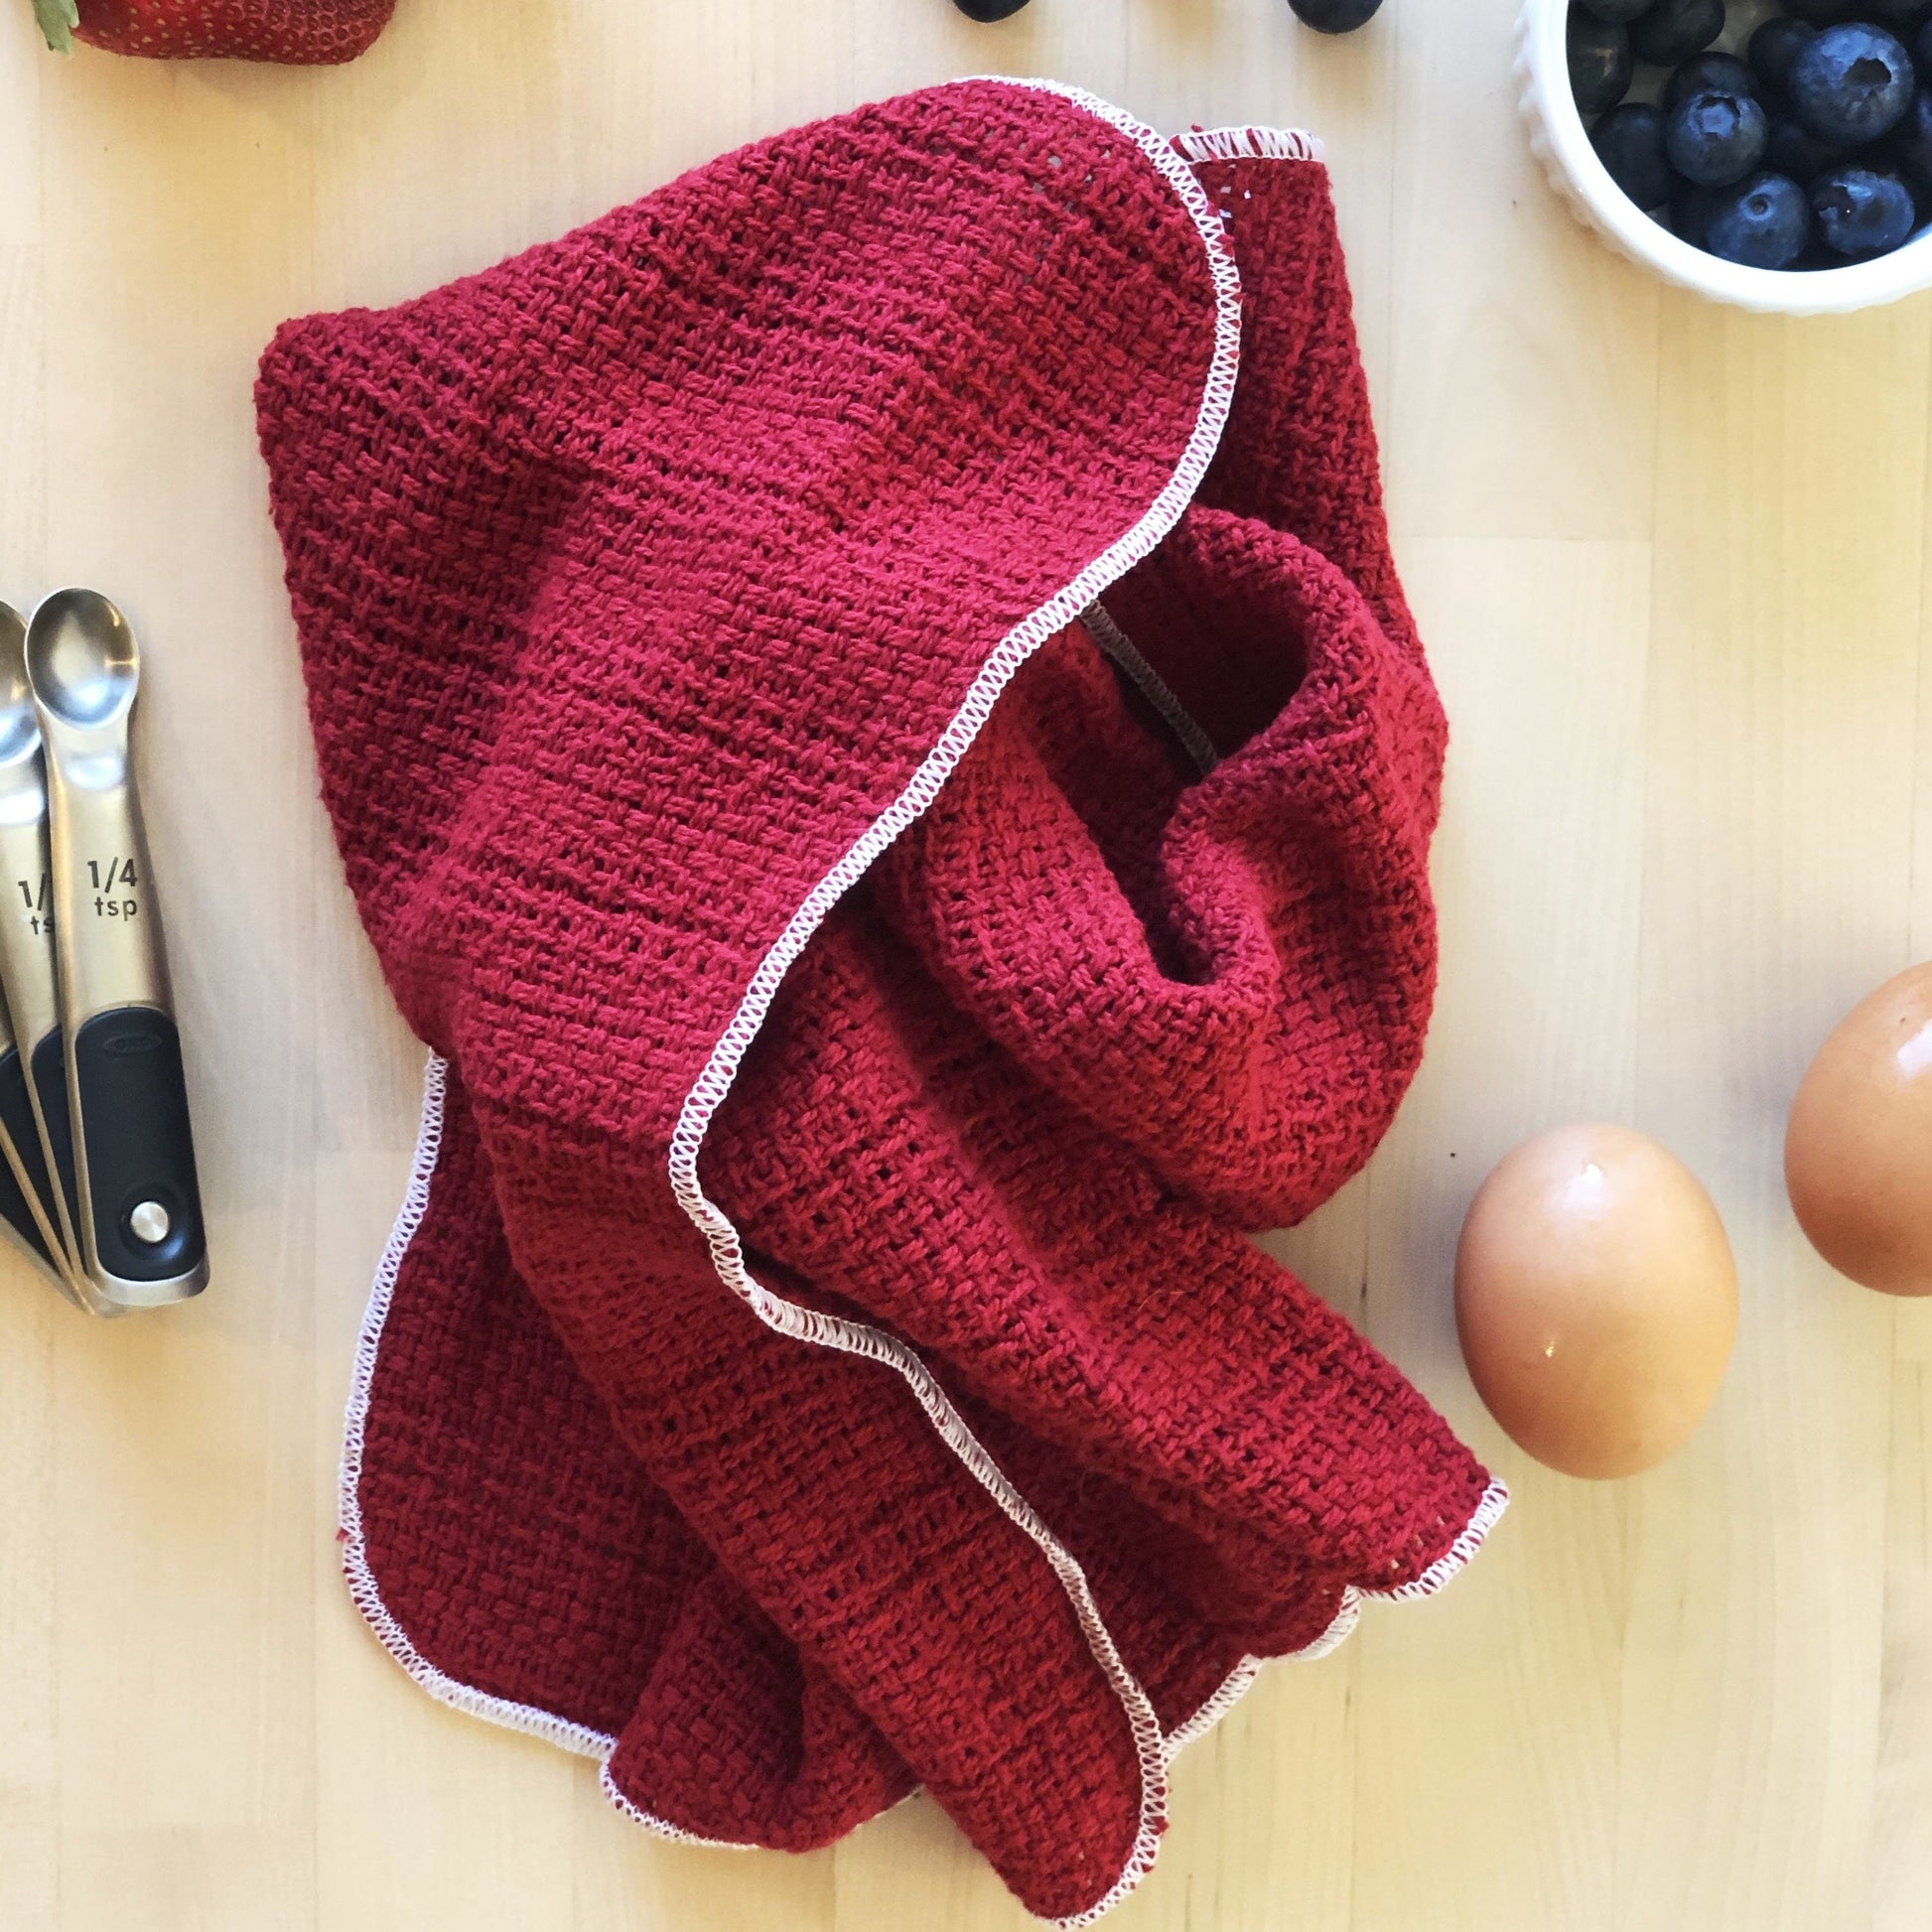 Kitchen Towels Made in the USA  The GREAT American Made Brands & Products  Directory - Made in the USA Matters